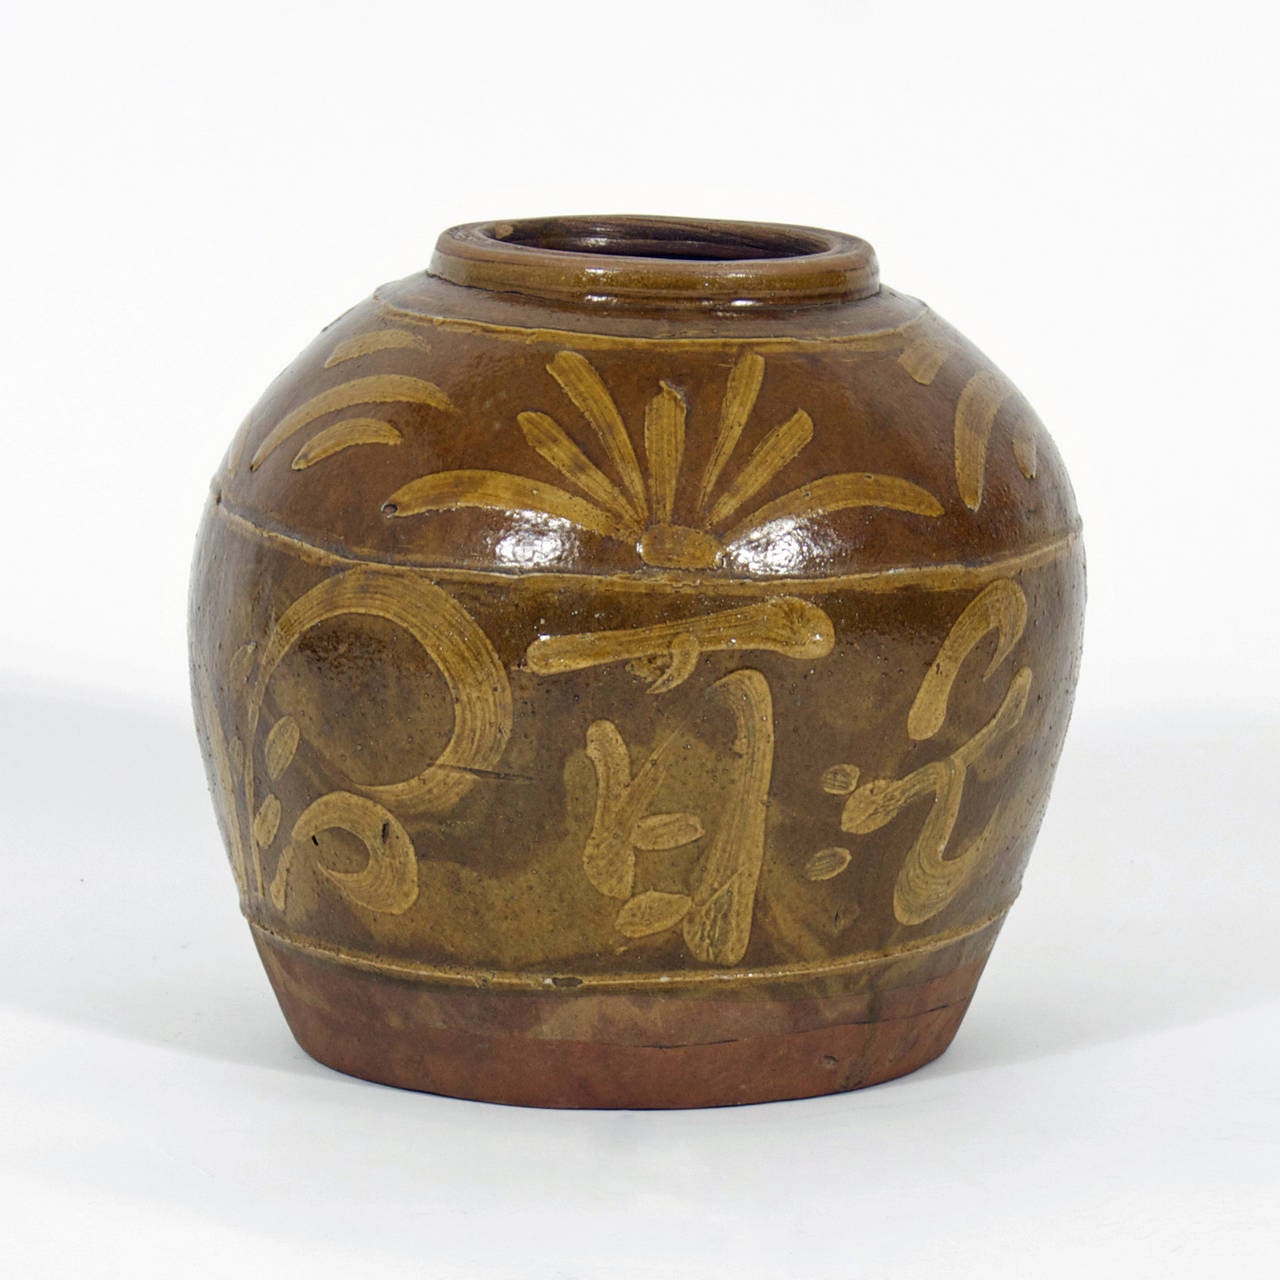 Terra cotta vase with brown, rustic glaze and decorated with Chinese characters and floral highlights, could be used in a traditional or modern interior.